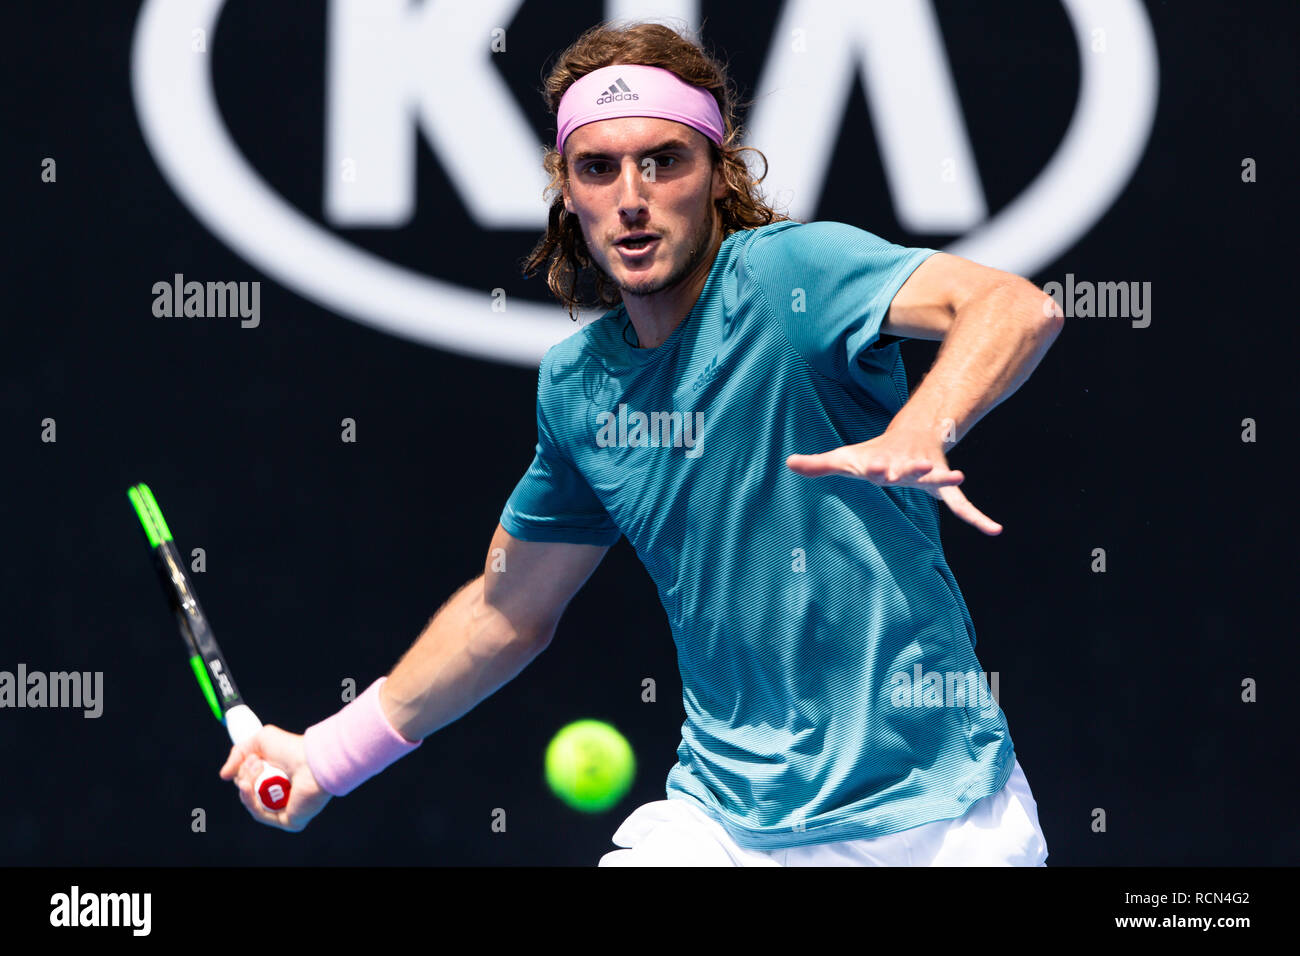 Melbourne, Australia. 16th Jan, 2019. Stefano Tsitsipas from Greece in  action during his 2nd round match at the 2019 Australian Open Grand Slam  tennis tournament in Melbourne, Australia. Credit: Frank Molter/Alamy Live